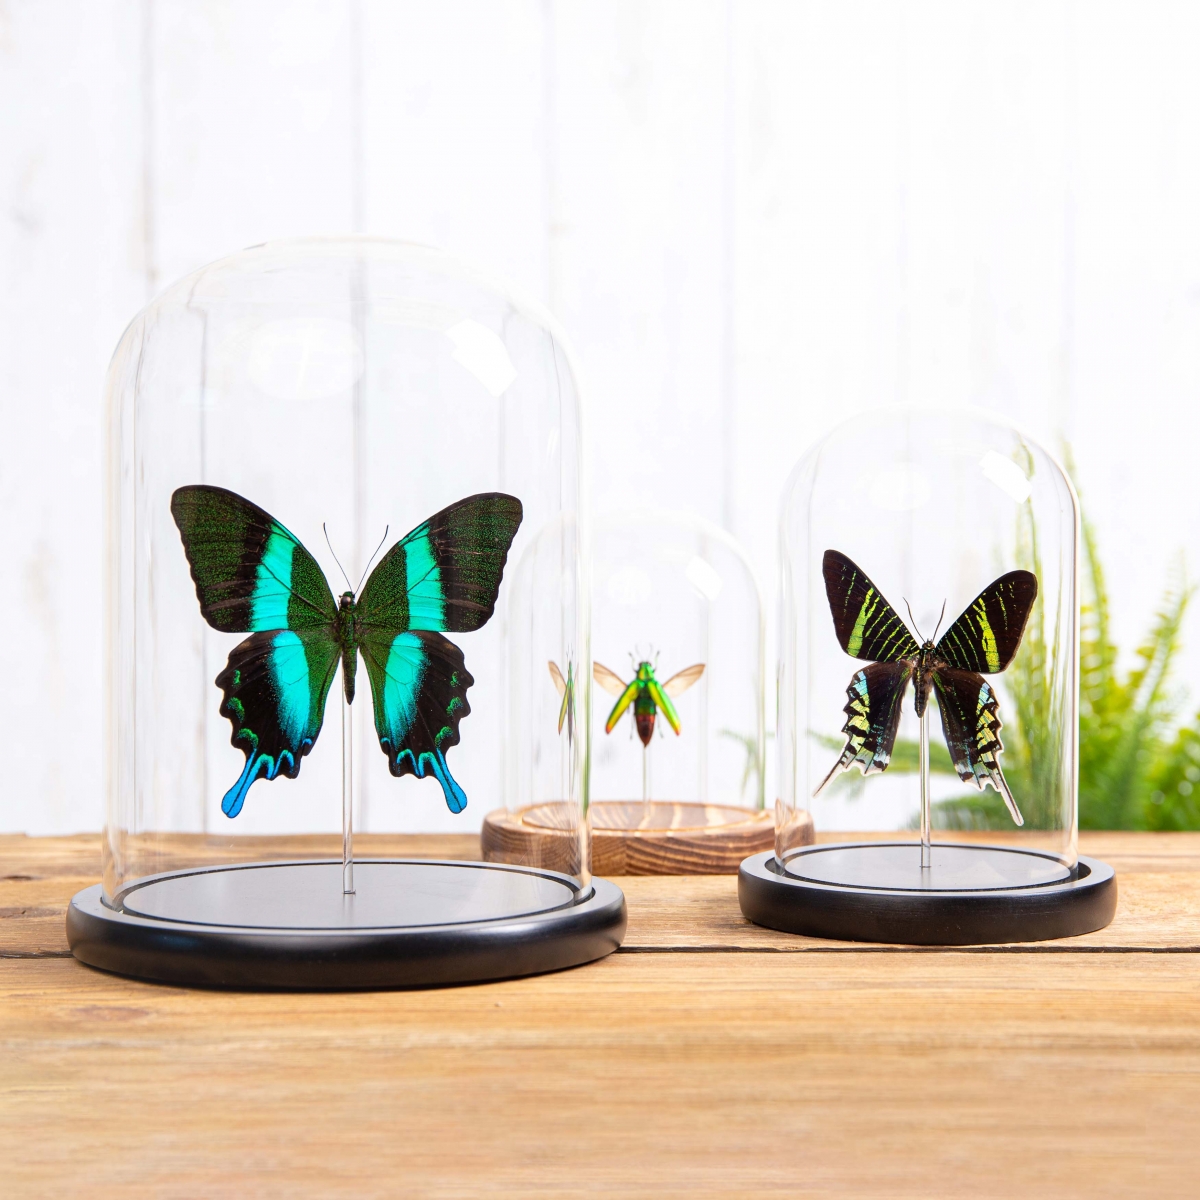 Flower Beetle Rainbow Trio in Glass Dome with Wooden Base from Thailand